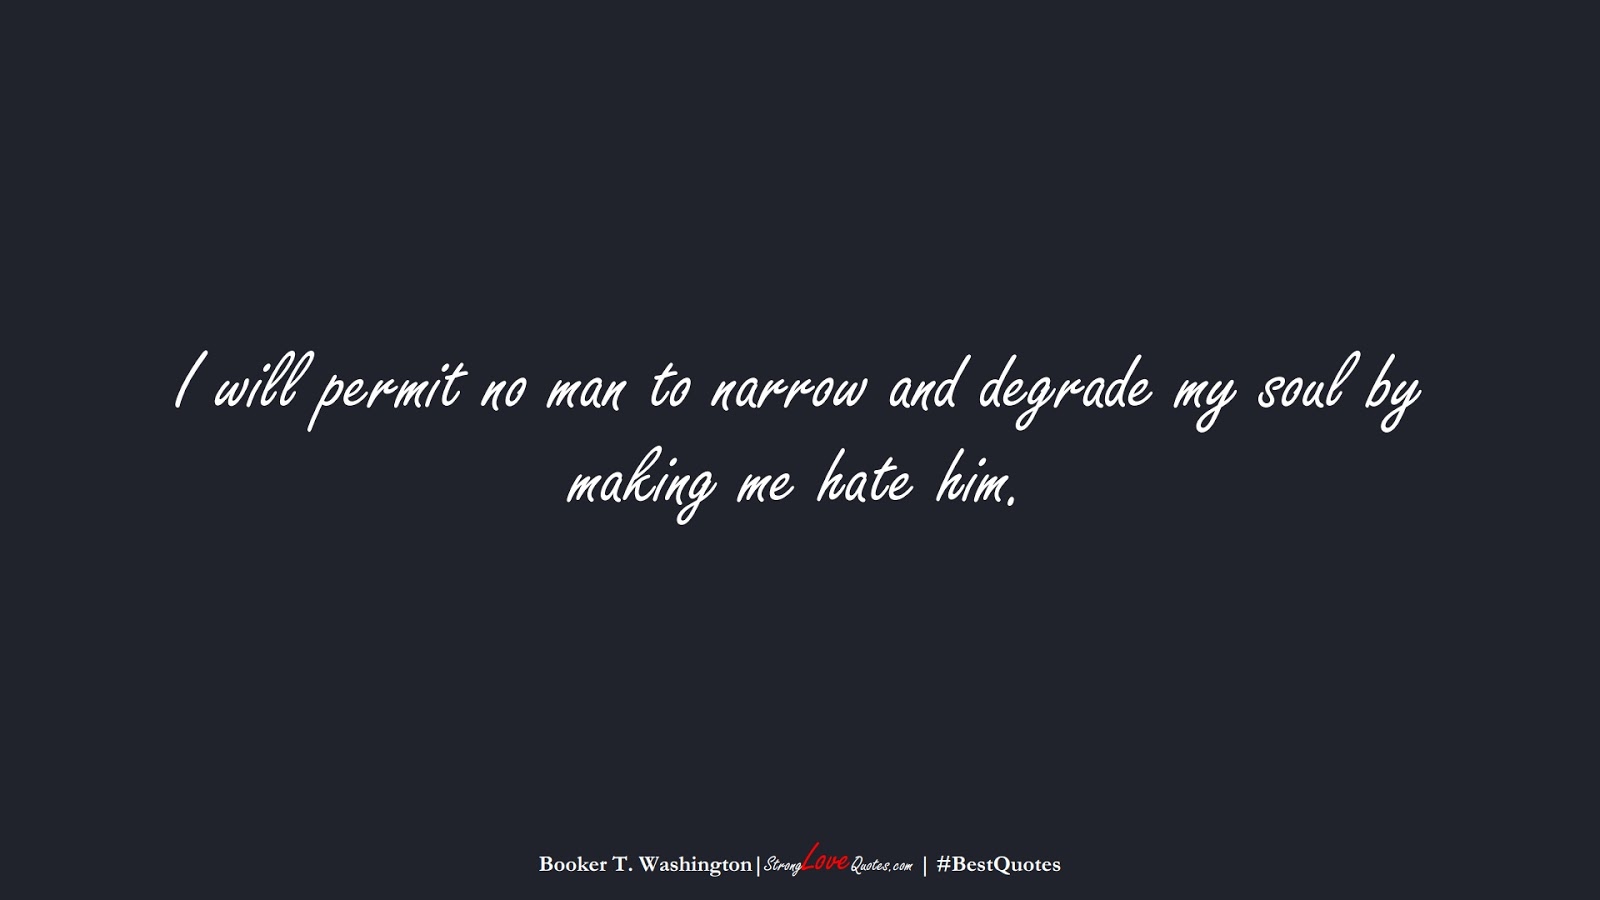 I will permit no man to narrow and degrade my soul by making me hate him. (Booker T. Washington);  #BestQuotes